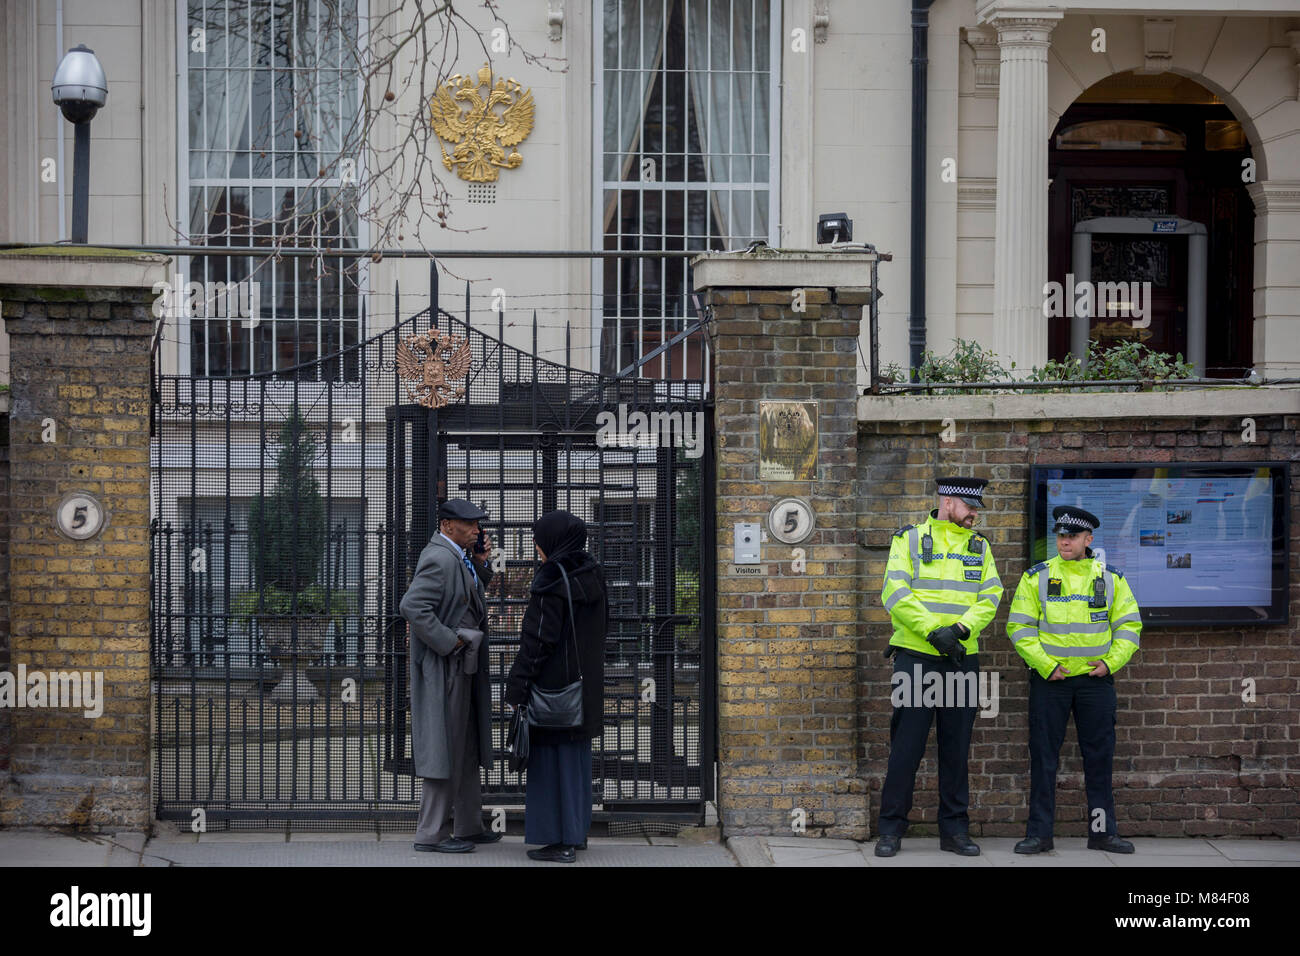 On the day that the British government awaits an explanation from the Kremlin over the poisoning by the nerve gas Novichok in Salisbury of ex-Russian spy Sergei Skripal and his daughter Yulia, Metropolitan police officers stand outside the Russian Federation Embassy and Consulate Section, on 13th March 2018, in London England. Stock Photo